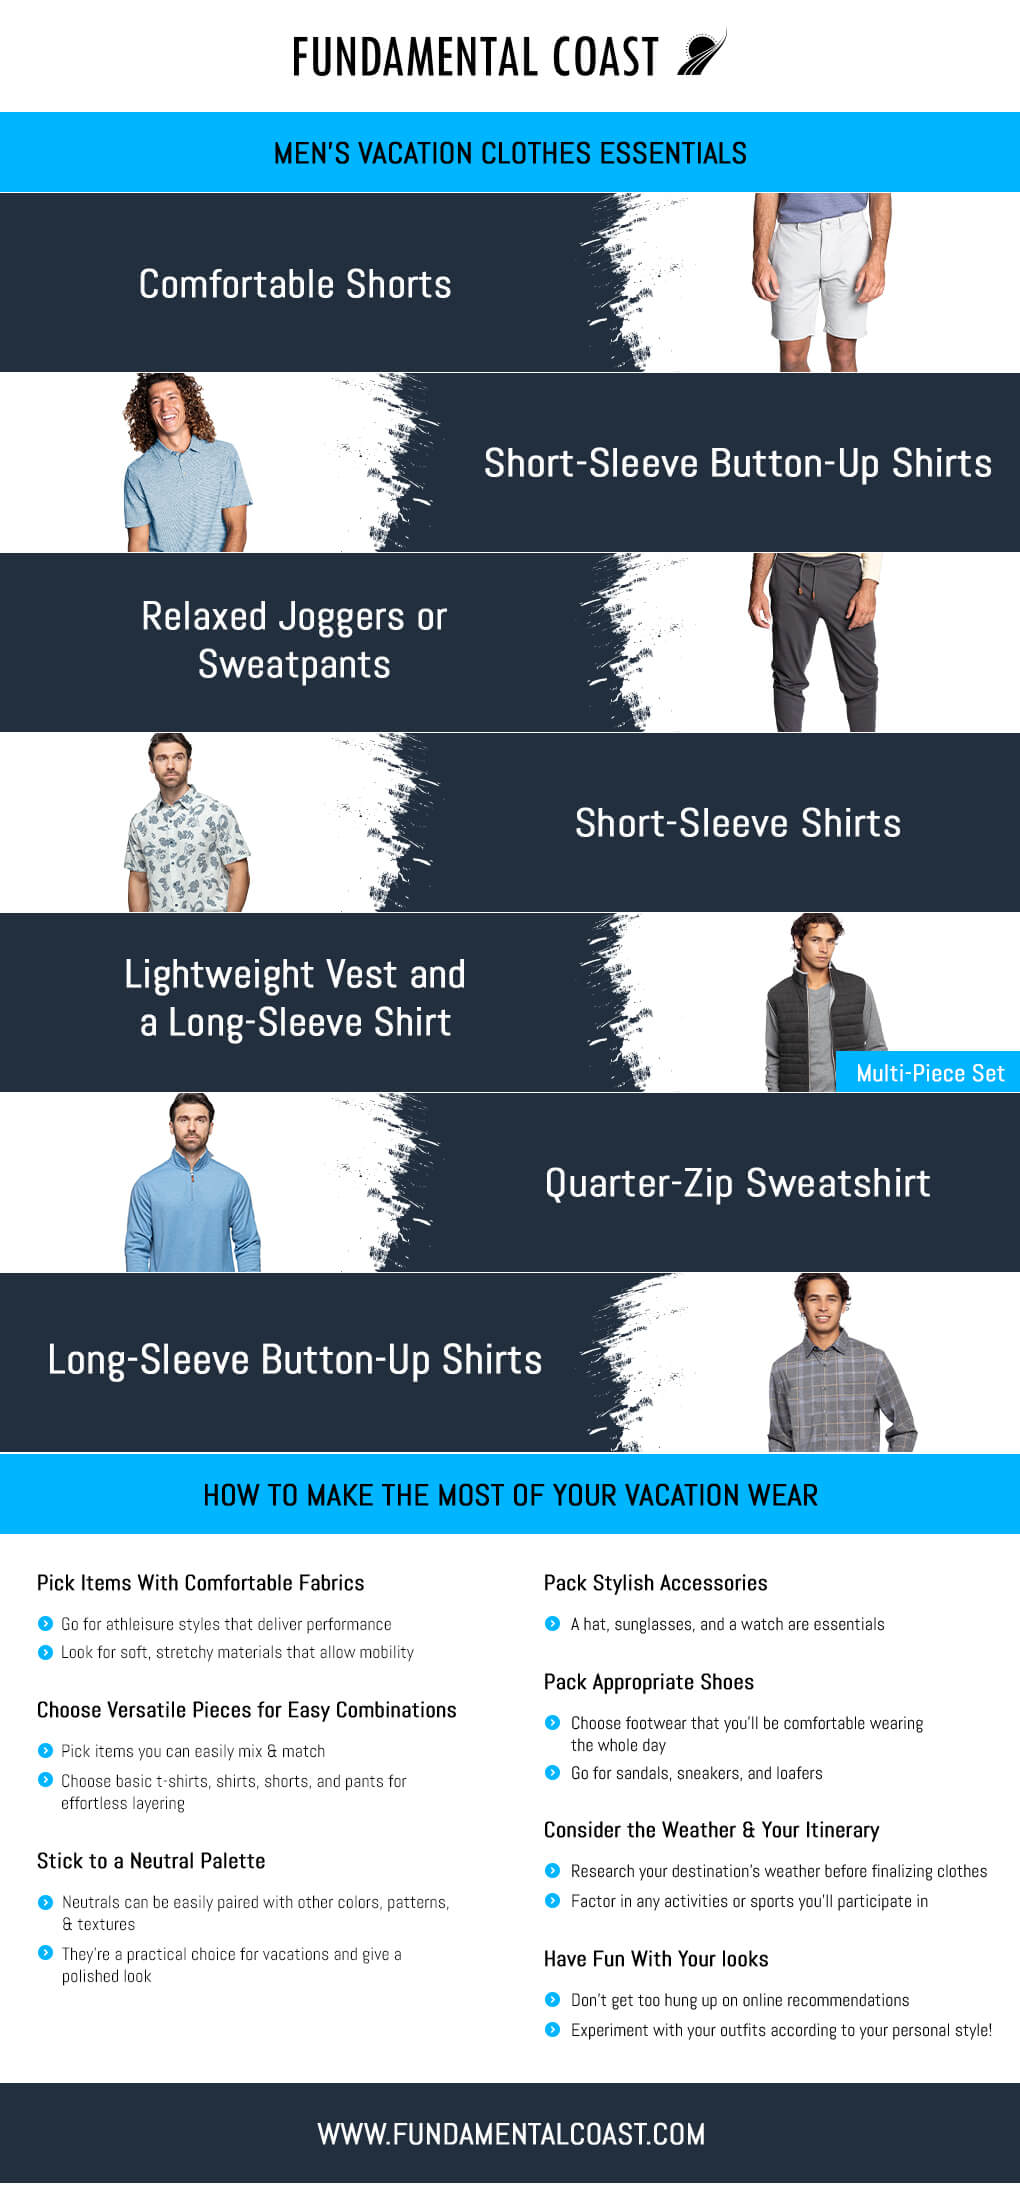 Men's Vacation Clothes Essentials and How to Make the Most of Your Vacation Wear